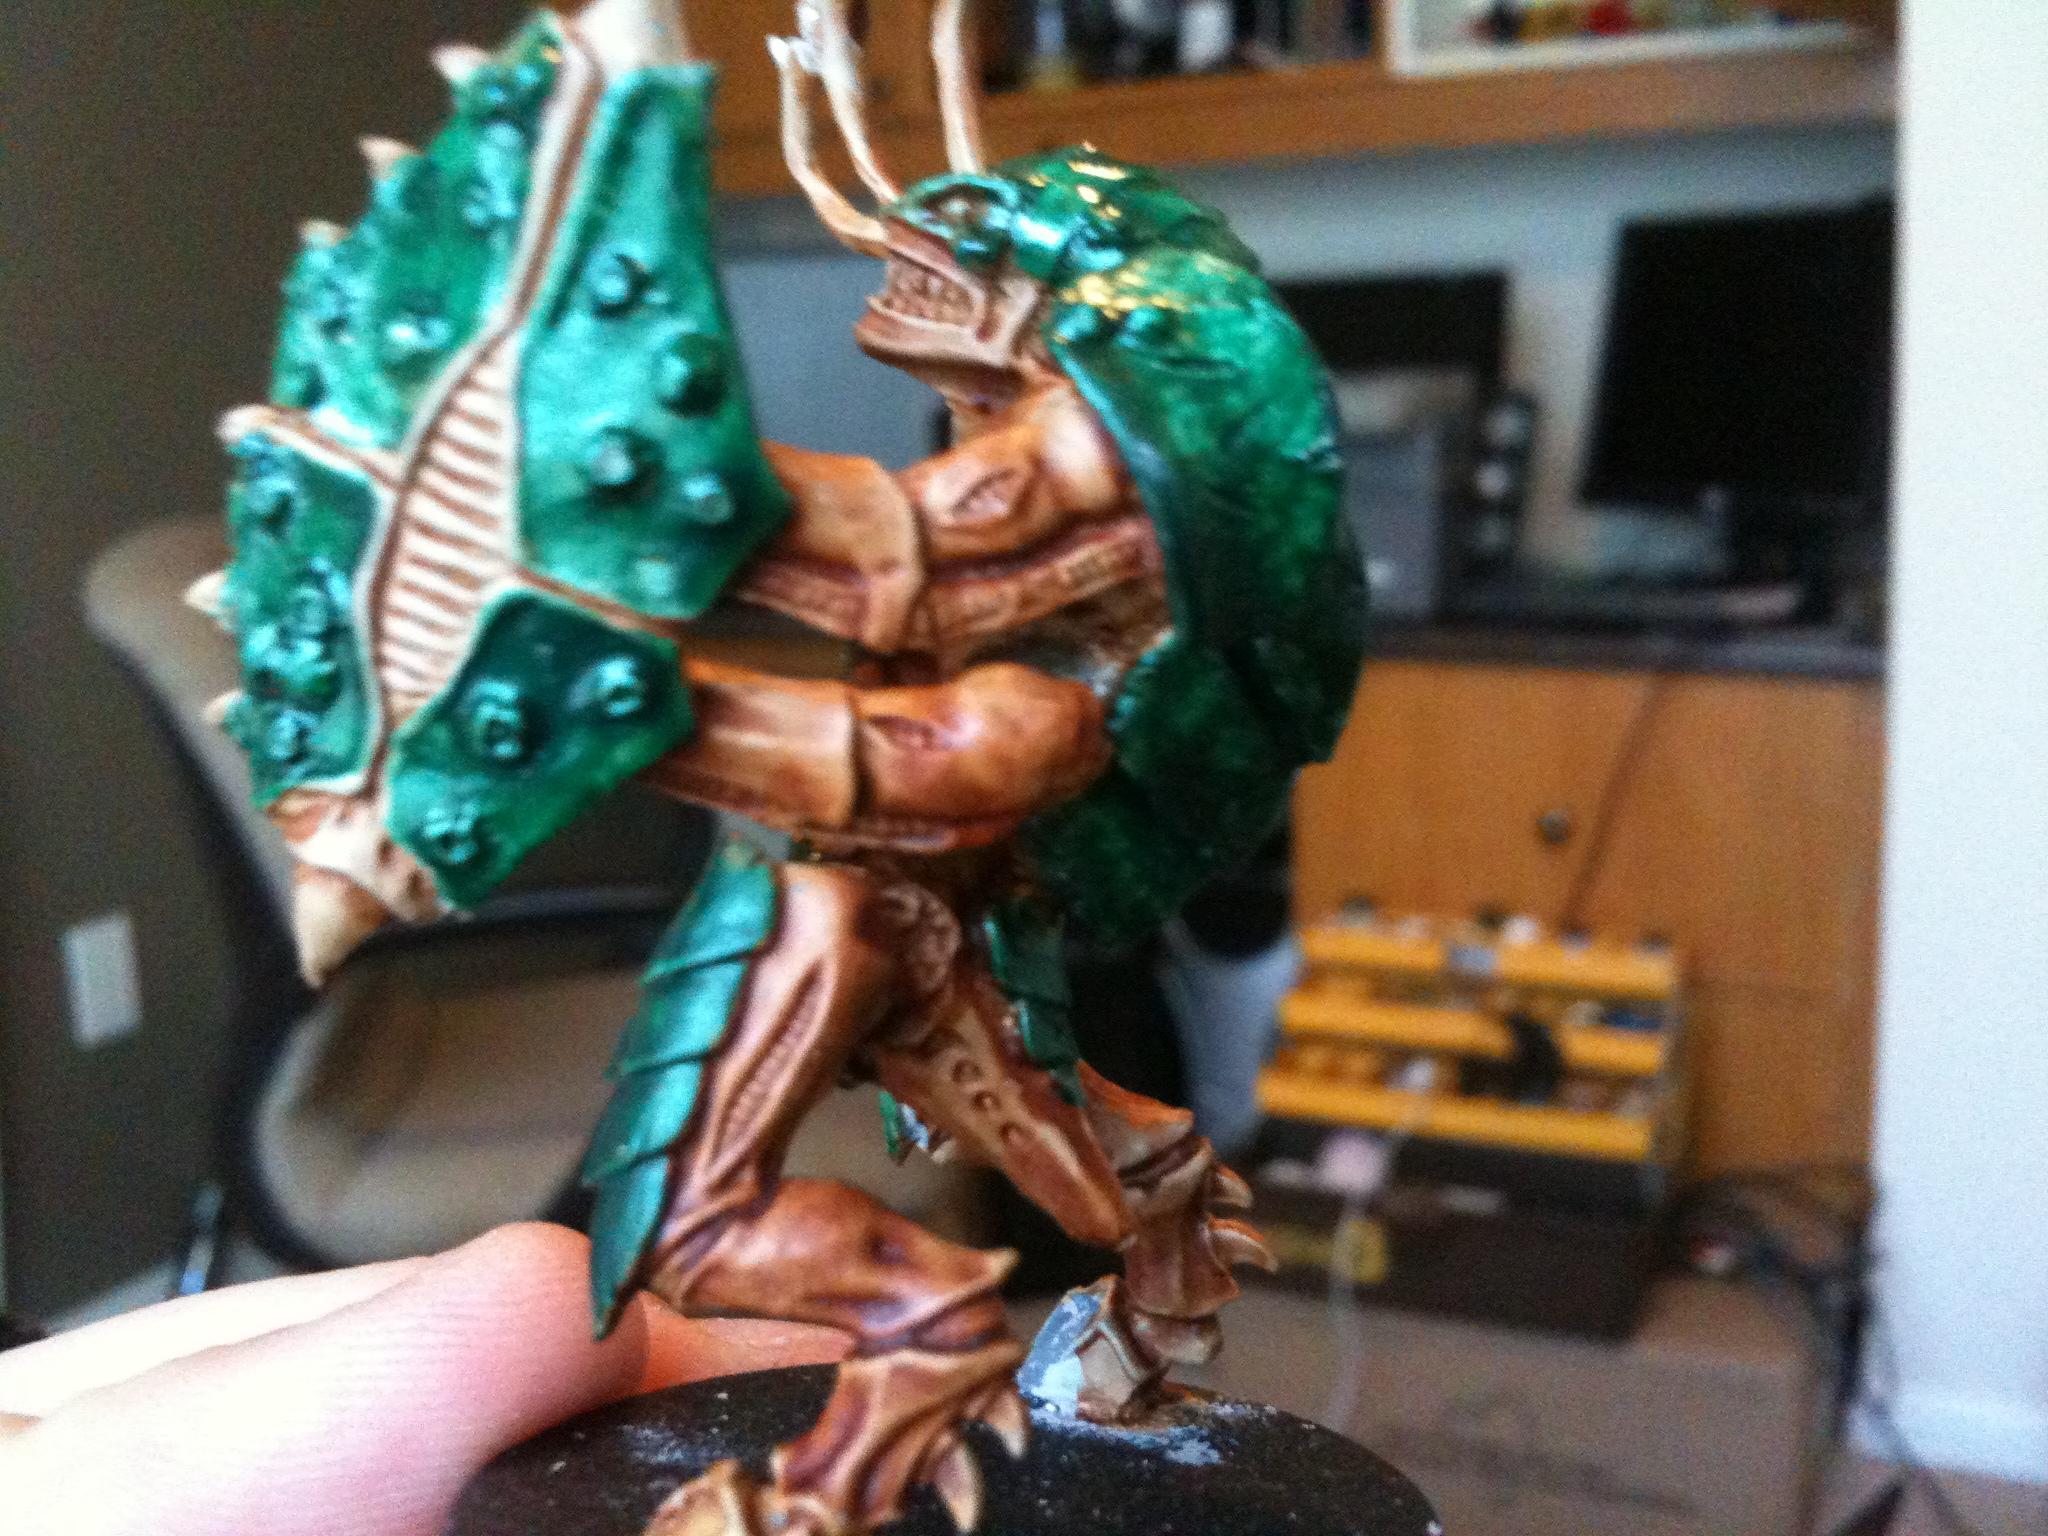 Painting progress. I've magnetized the genitals. A first?